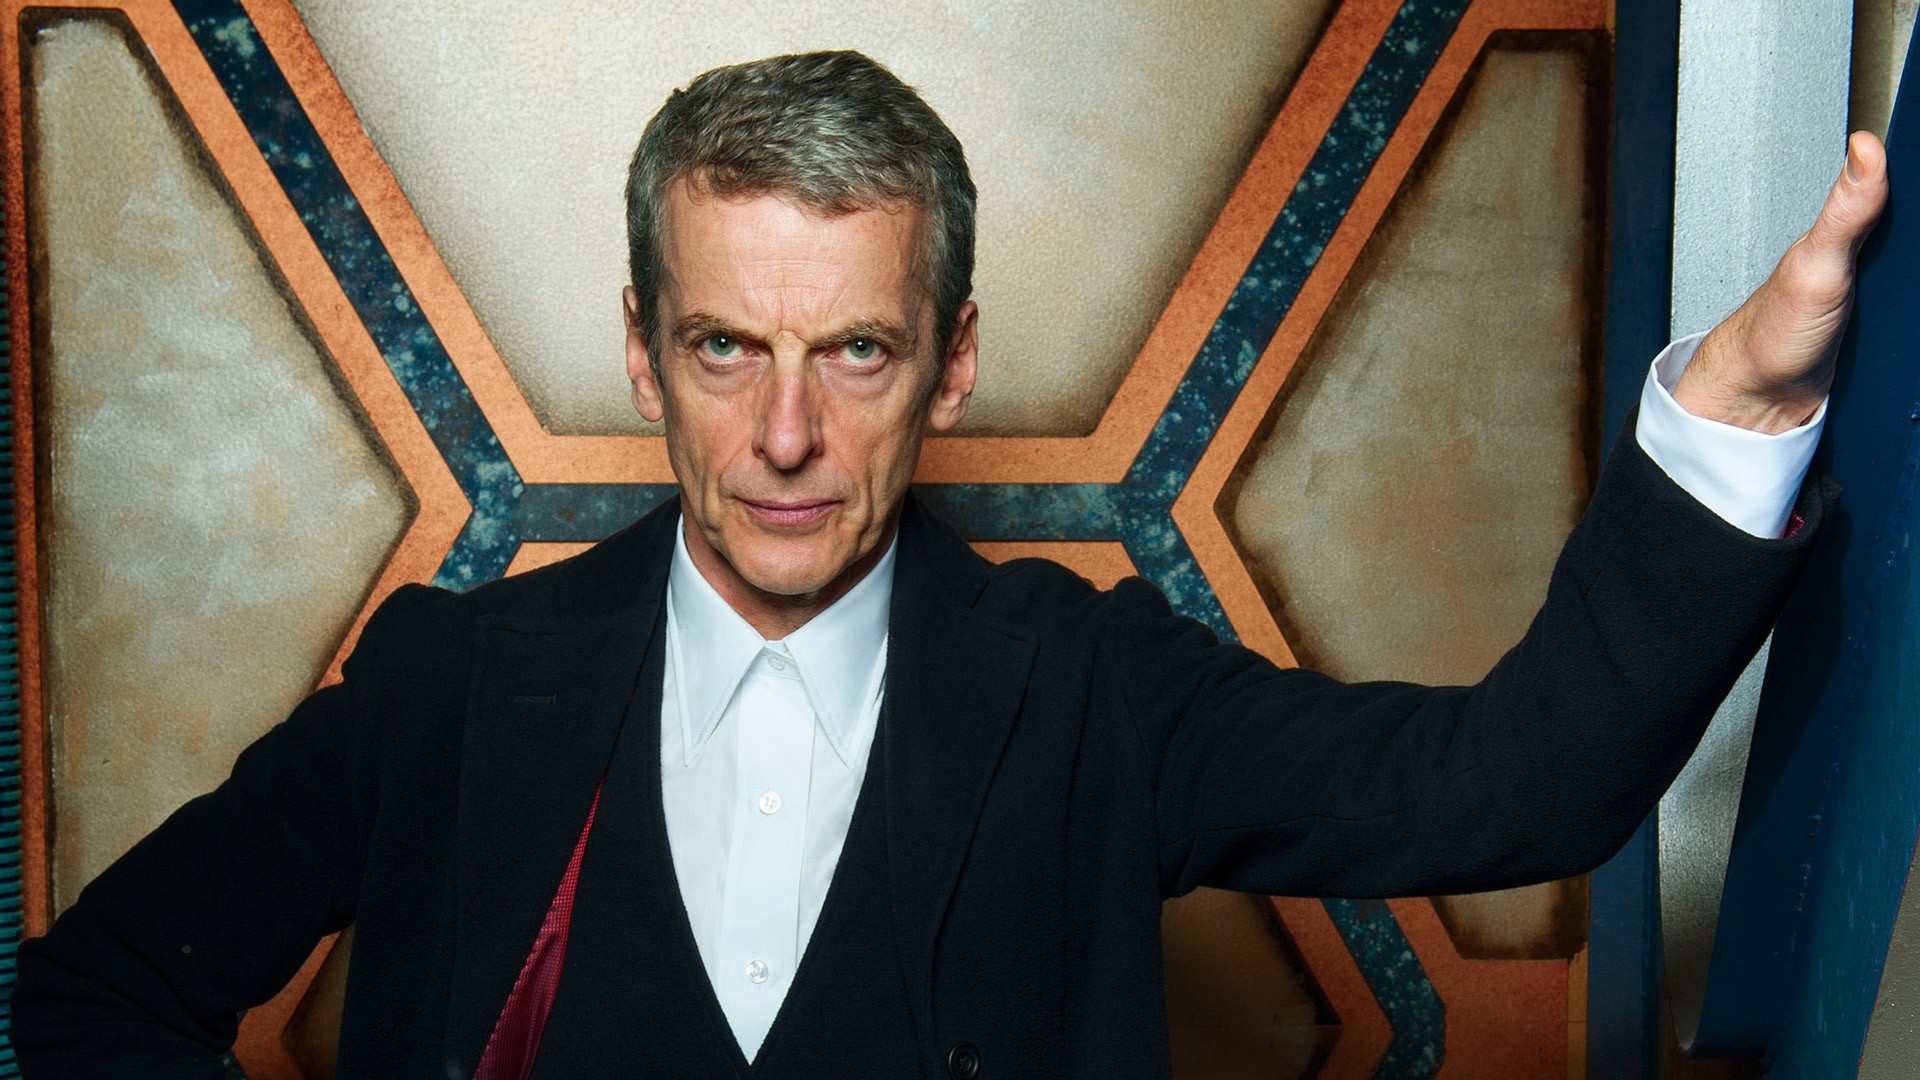 Doctor Who Peter Capaldi Tv Series 1920x1080